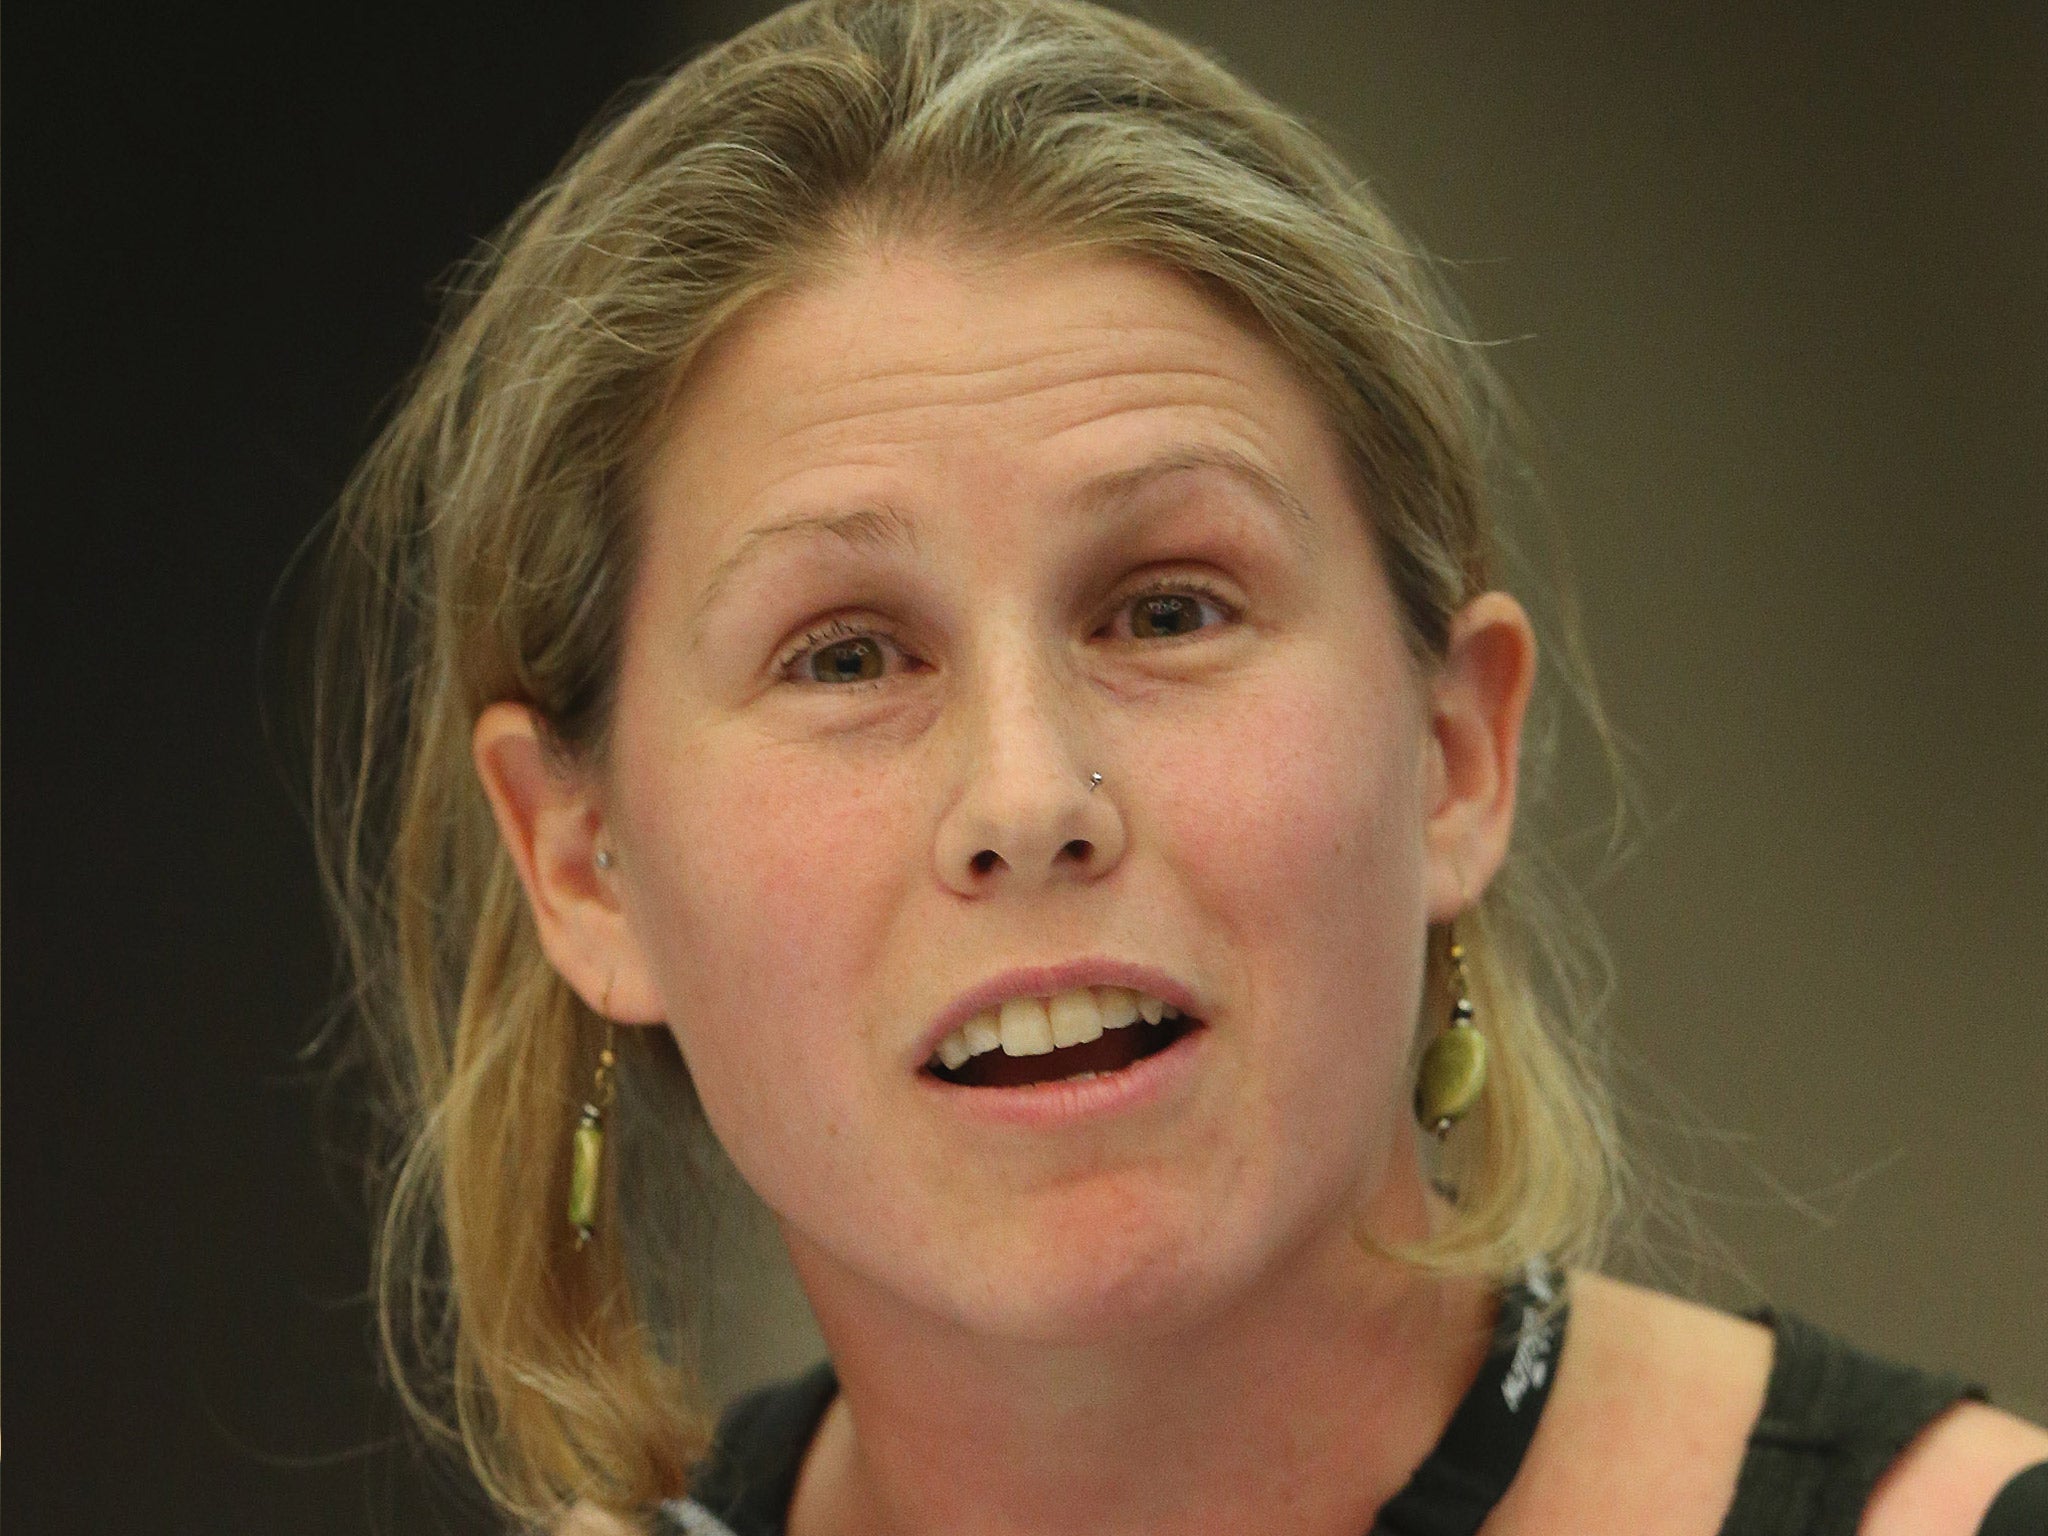 Caroline Criado-Perez was subjected to rape and death threats on Twitter